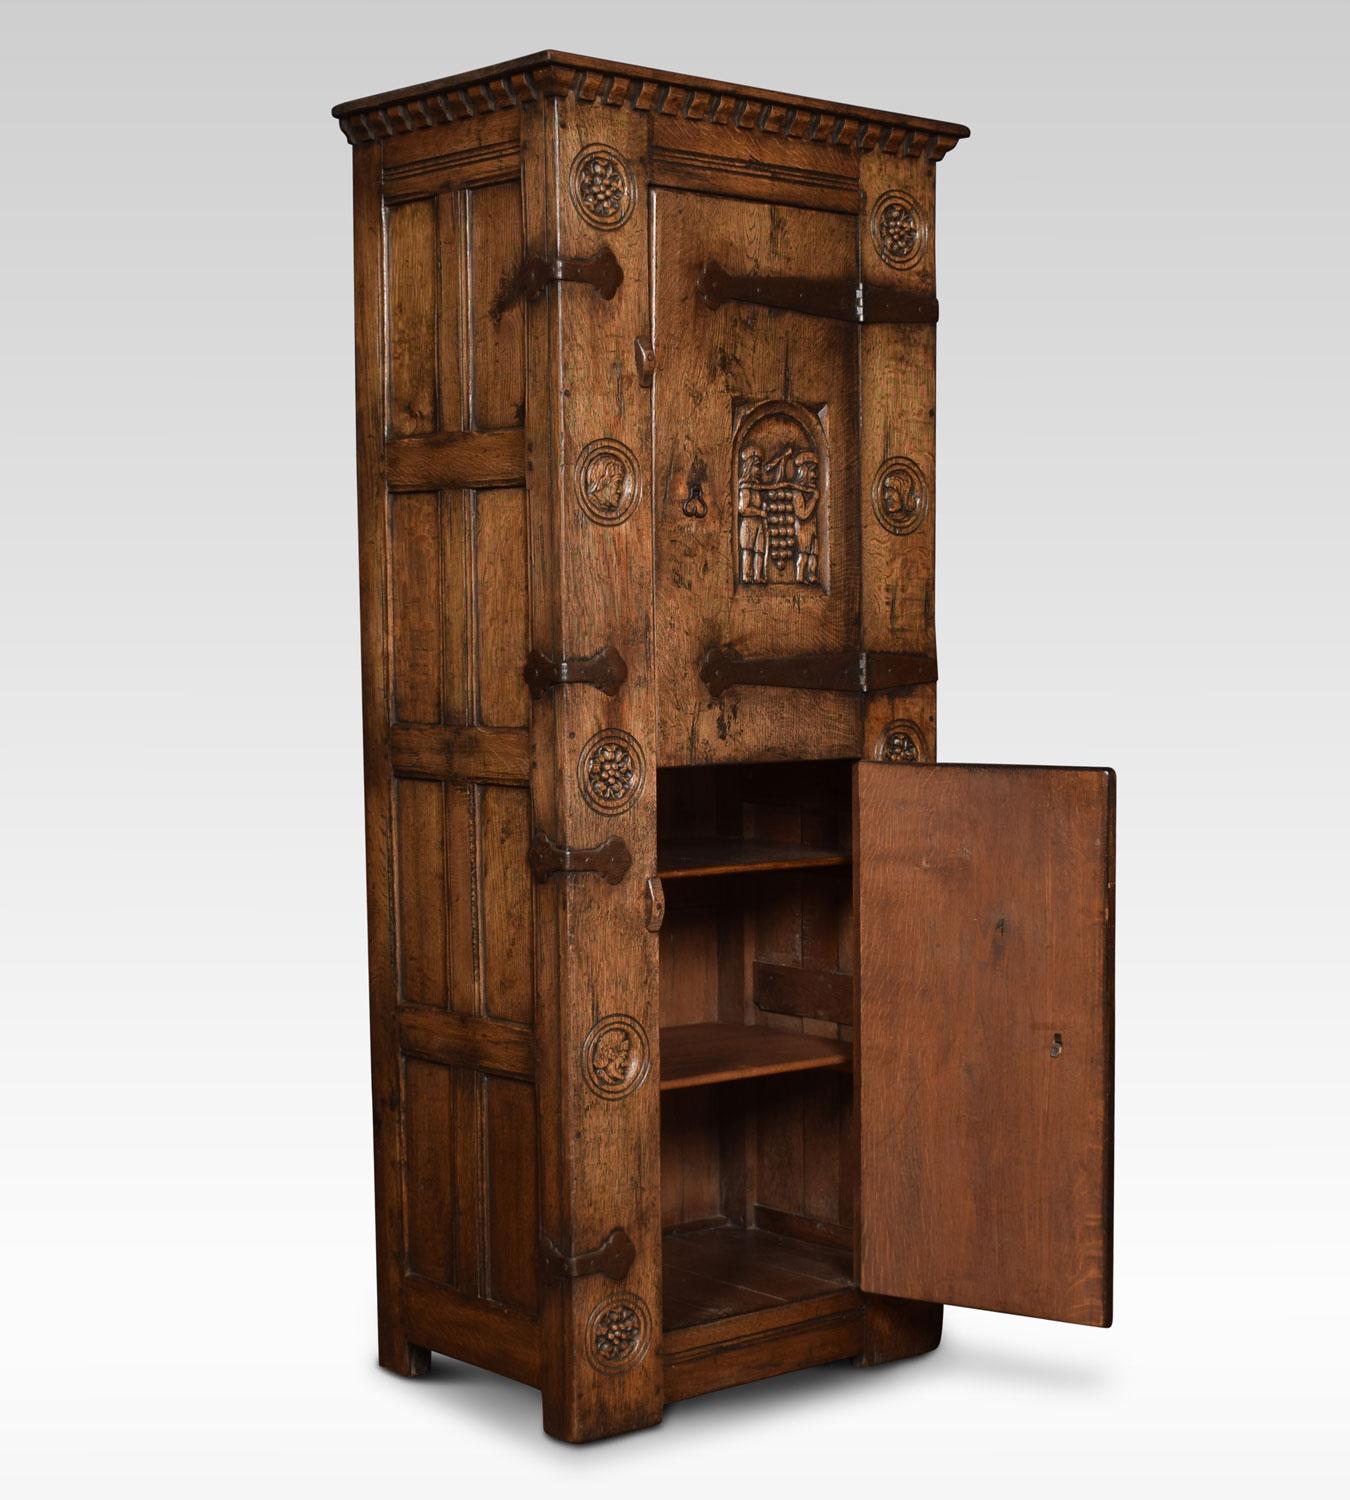 Oak cupboard, the moulded top above twin figure and shield motif doors with large iron strap hinges. Opening to reveal a shelved interior. The stylised roundels depicting Roman heads and Tudor roses.
Dimensions:
Height 70.5 inches
Width 33